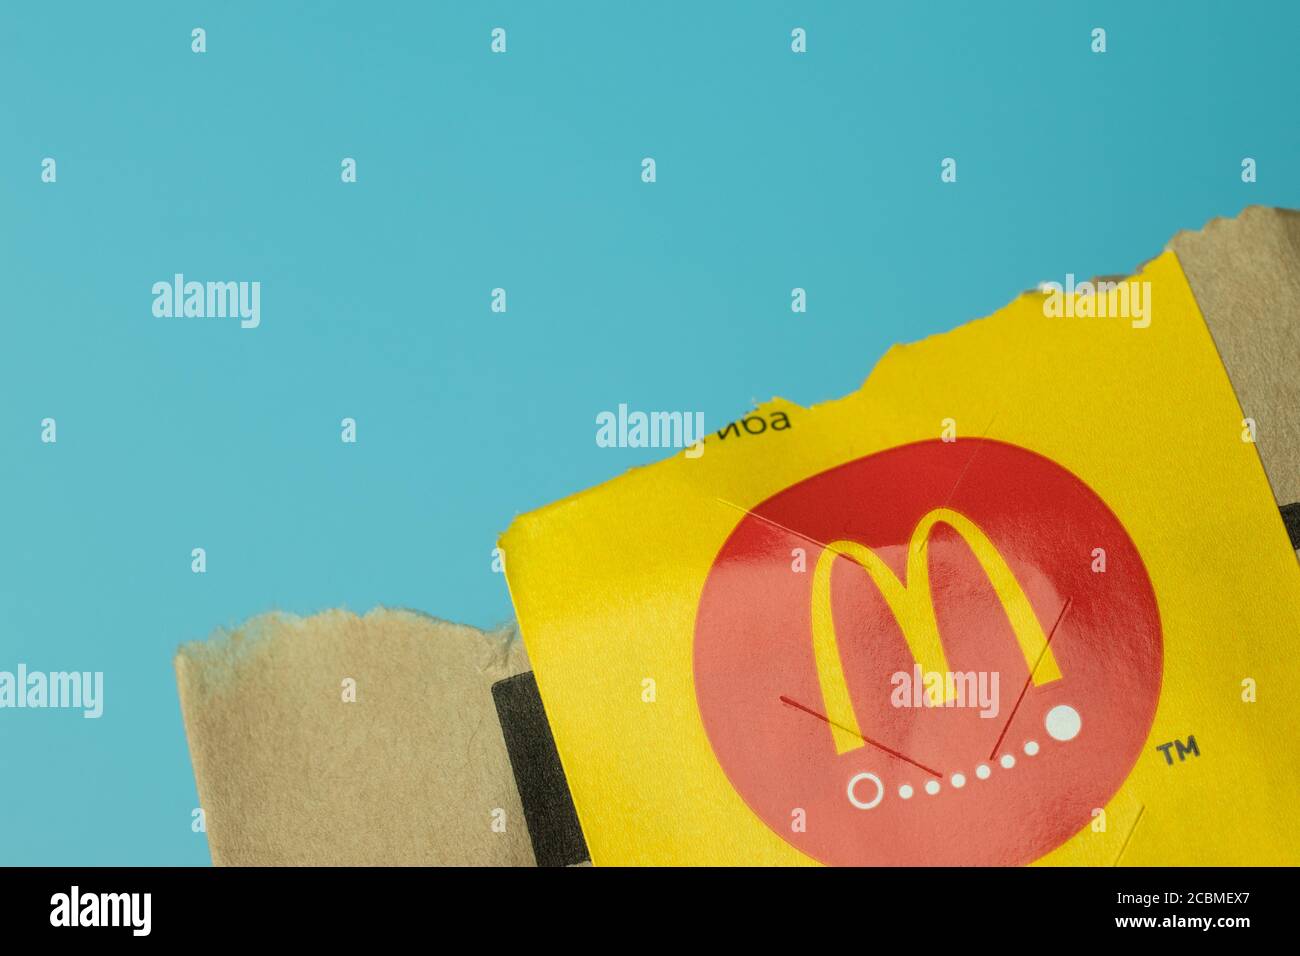 Moscow, Russia - 1 June 2020: McDonalds logo close-up with copy space, Illustrative Editorial Stock Photo